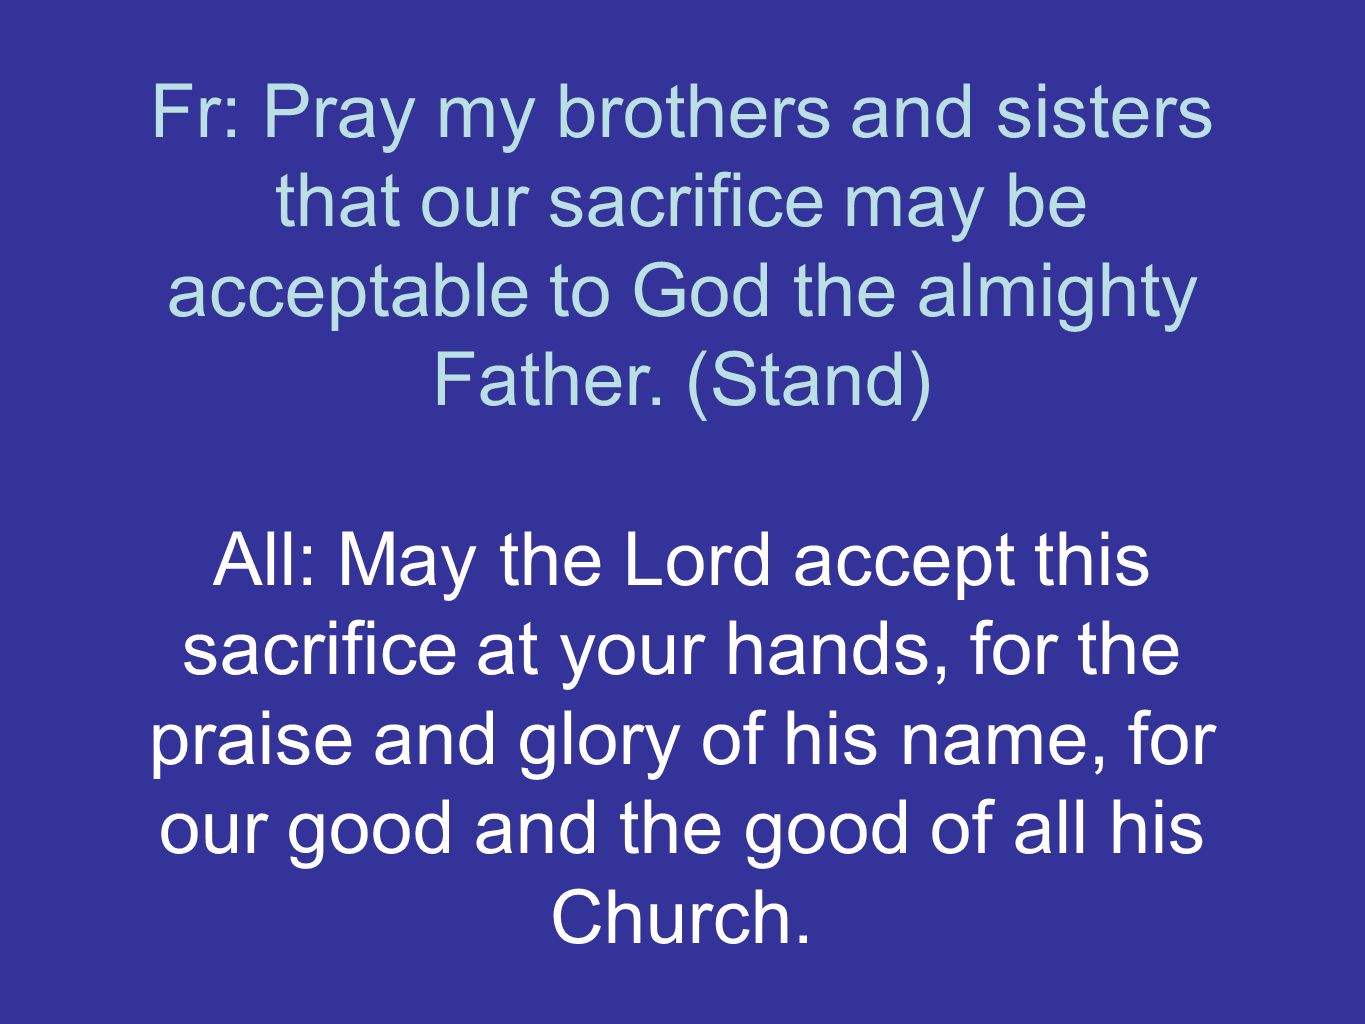 Fr: Pray my brothers and sisters that our sacrifice may be acceptable to God the almighty Father.